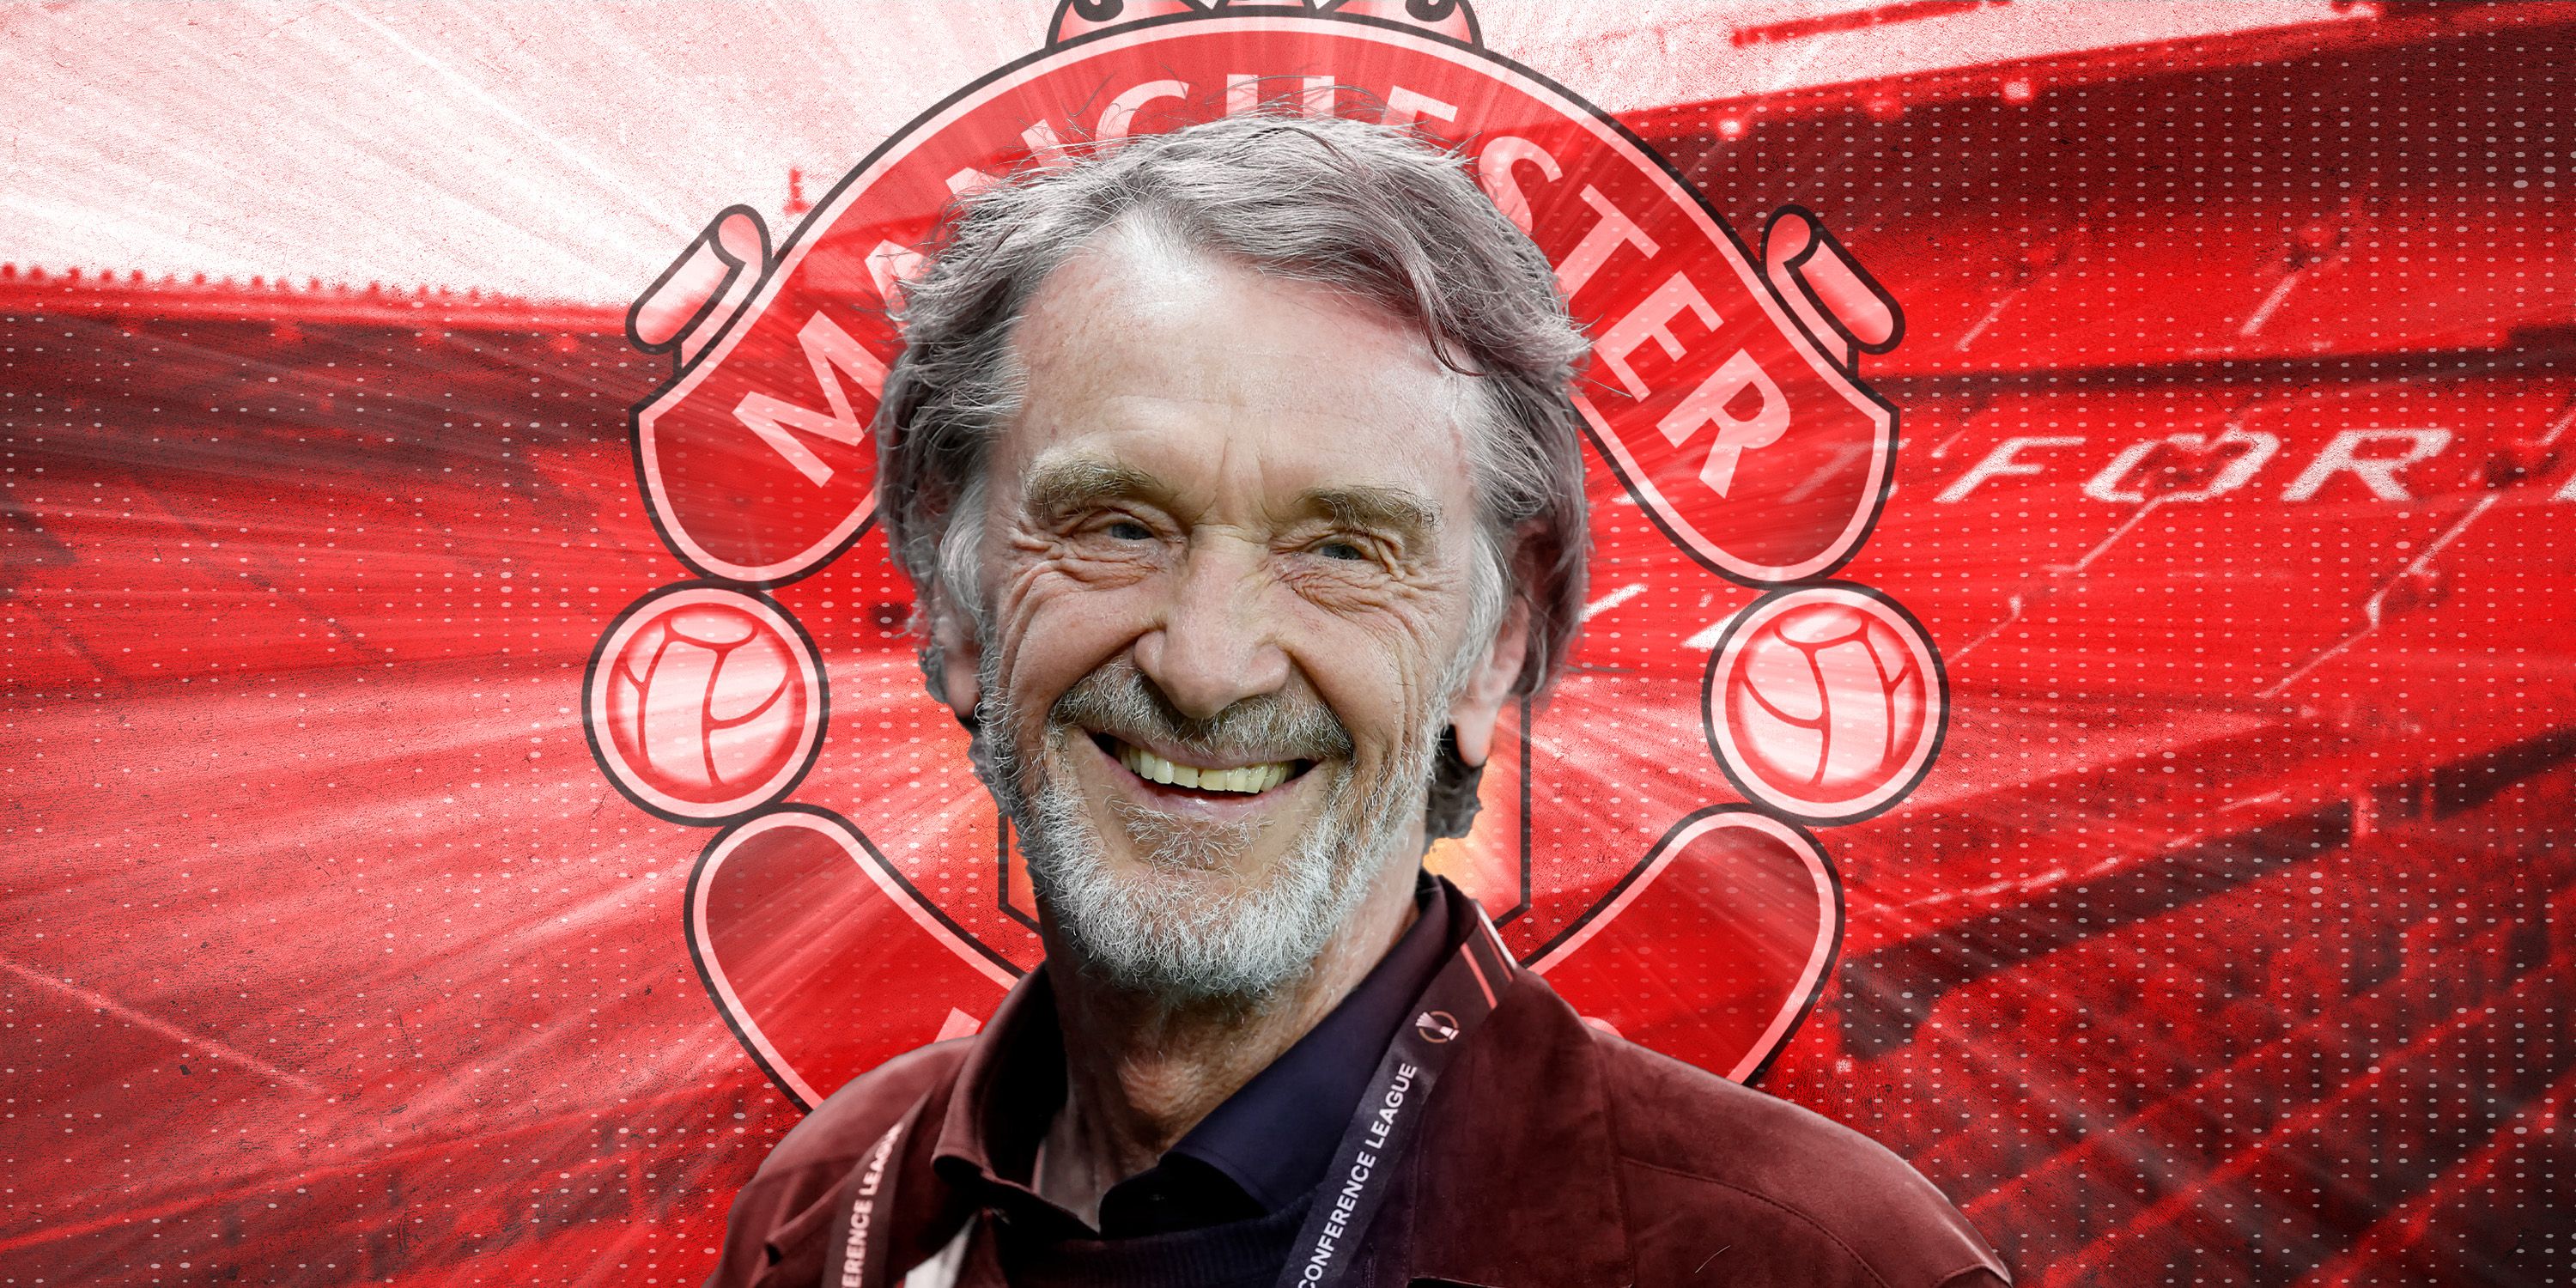 Manchester United owner Sir Jim Ratcliffe.